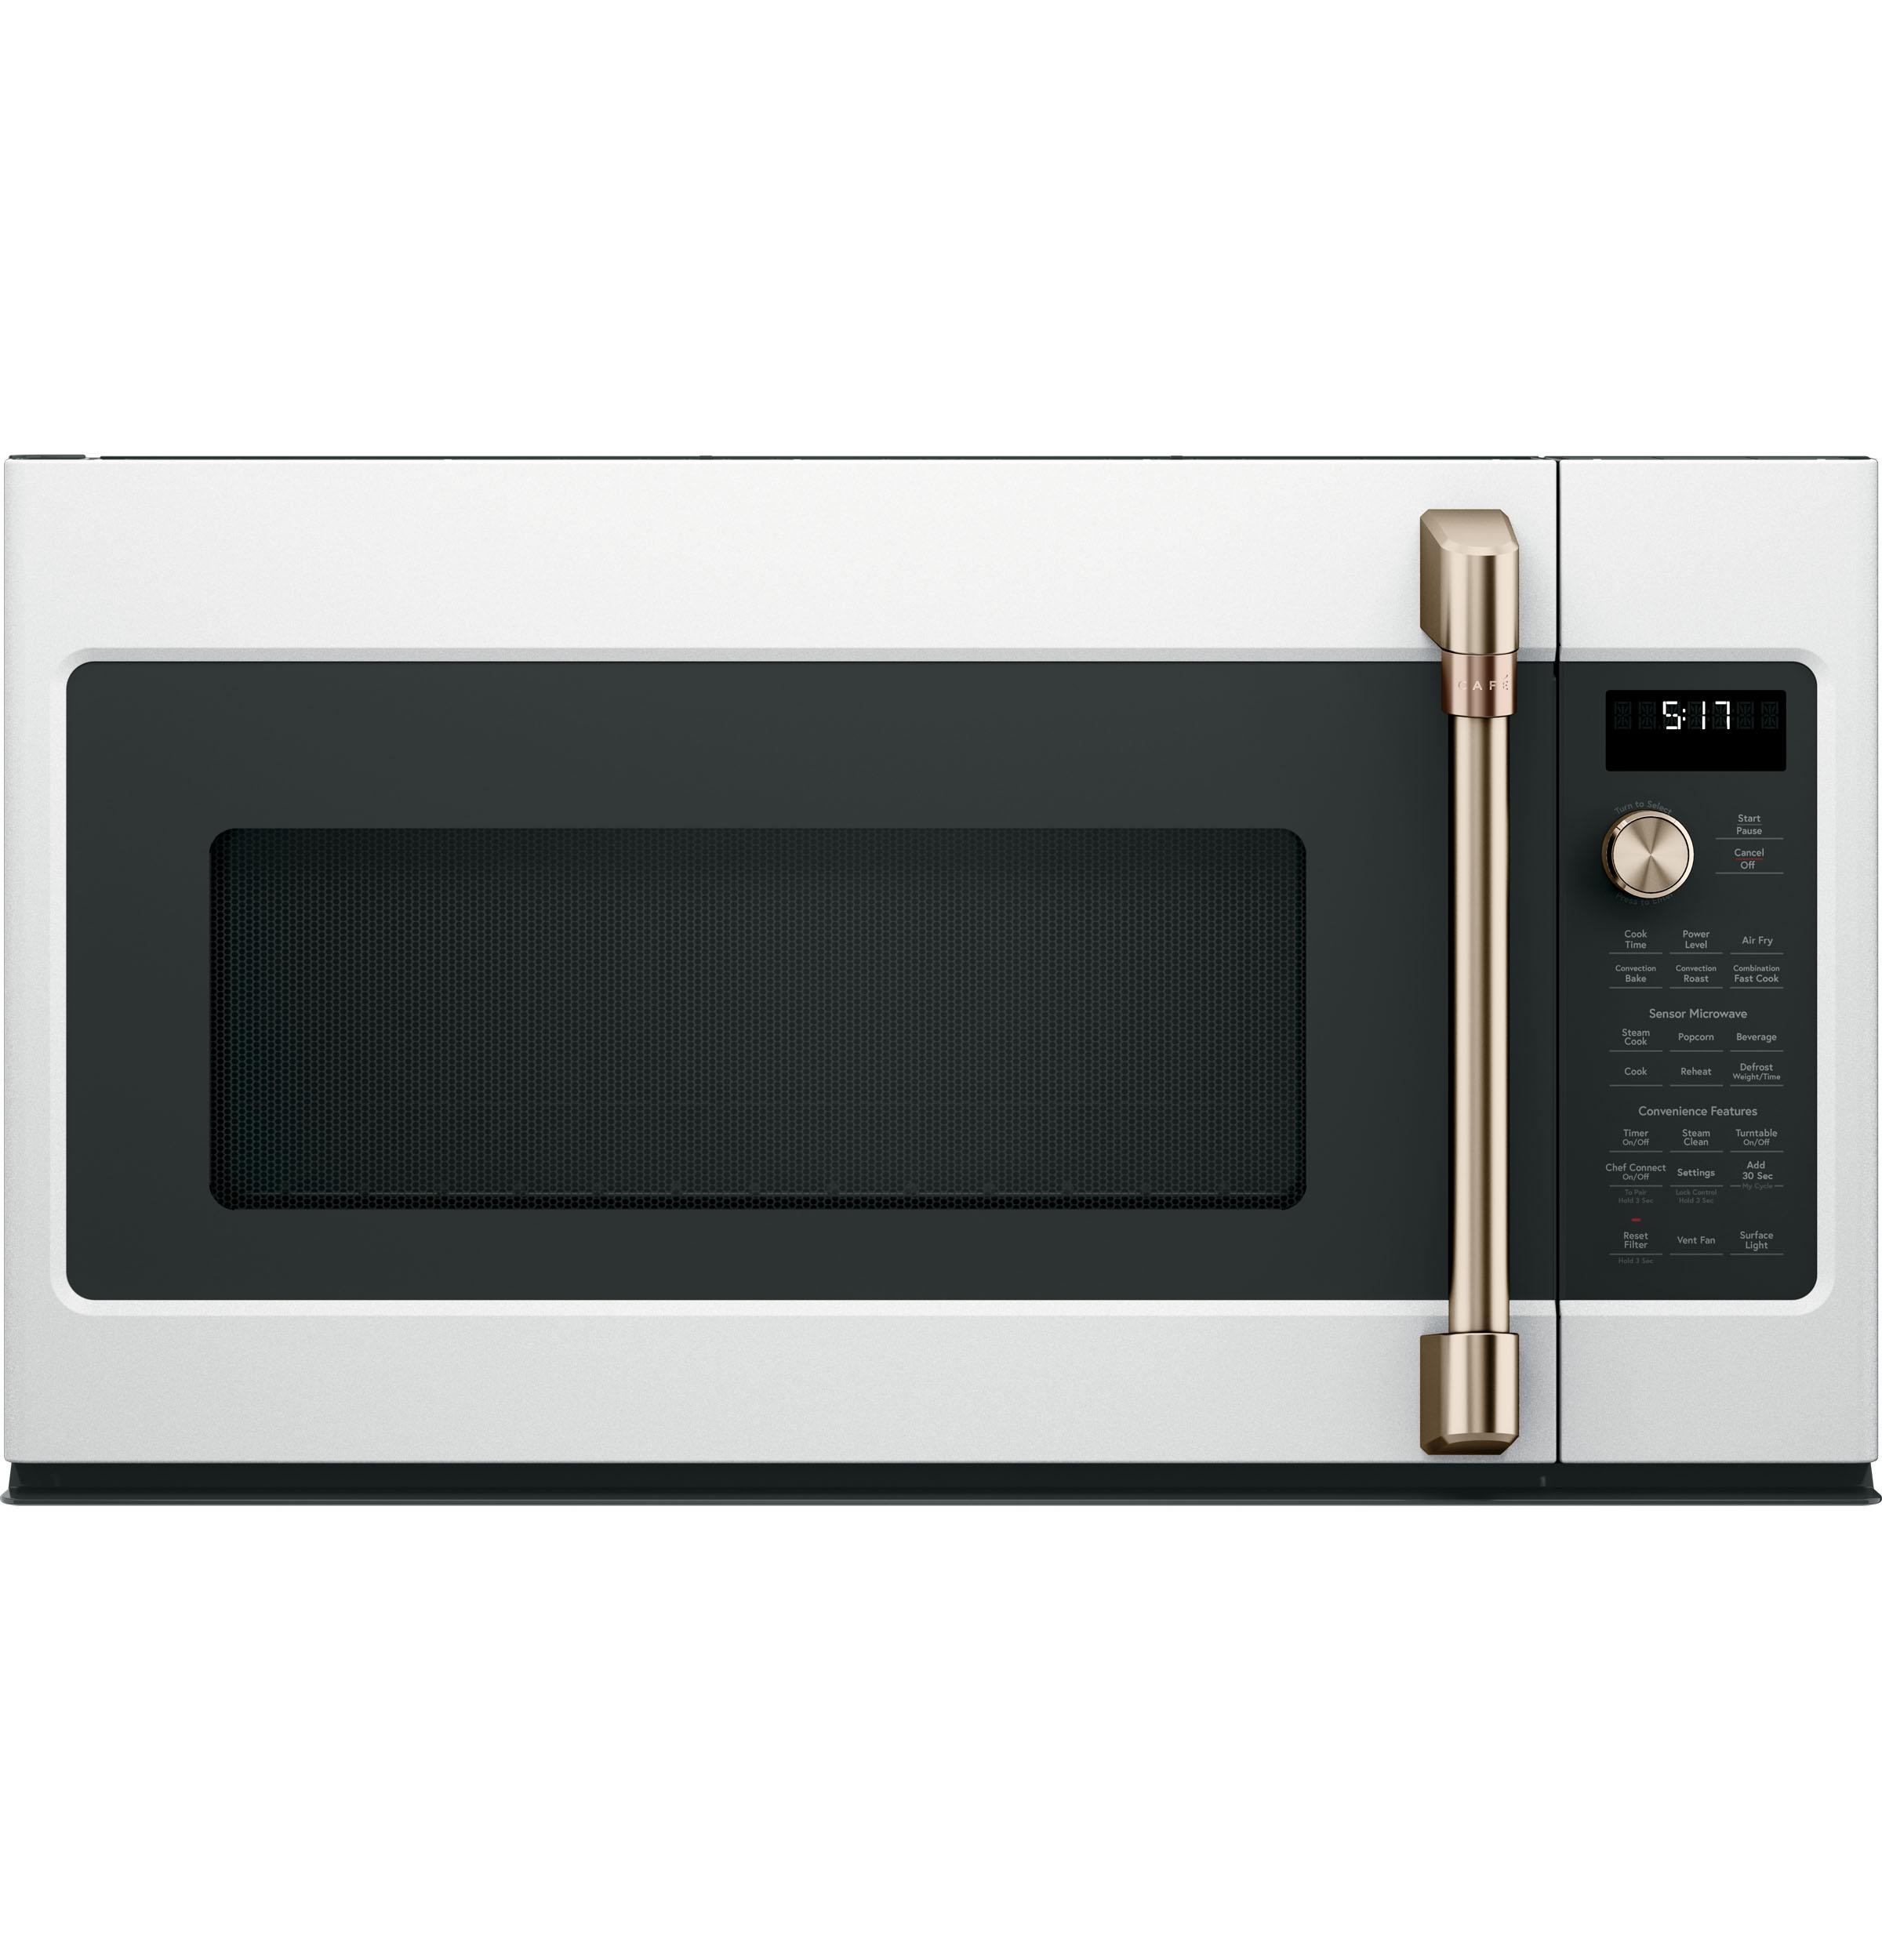 CAFE 30" Over the Range Convection Microwave